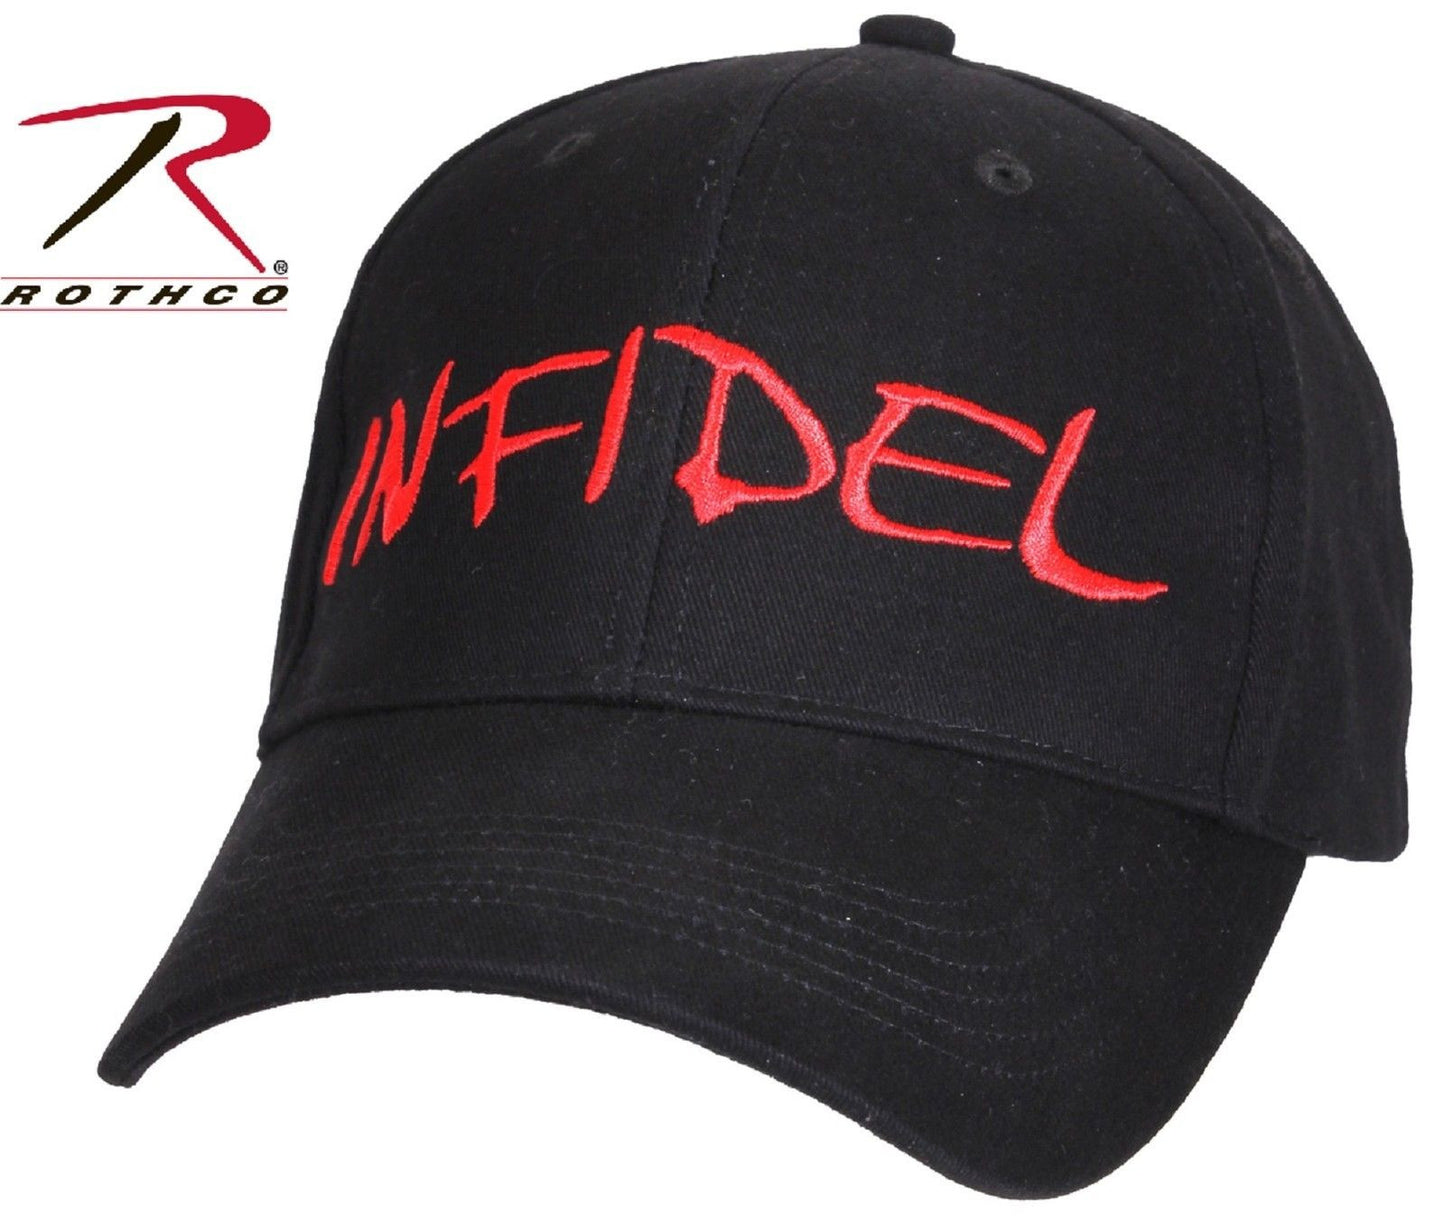 Mens Deluxe Low Profile INFIDEL Hat - Rothco Black & Red Adjustable Baseball Cap